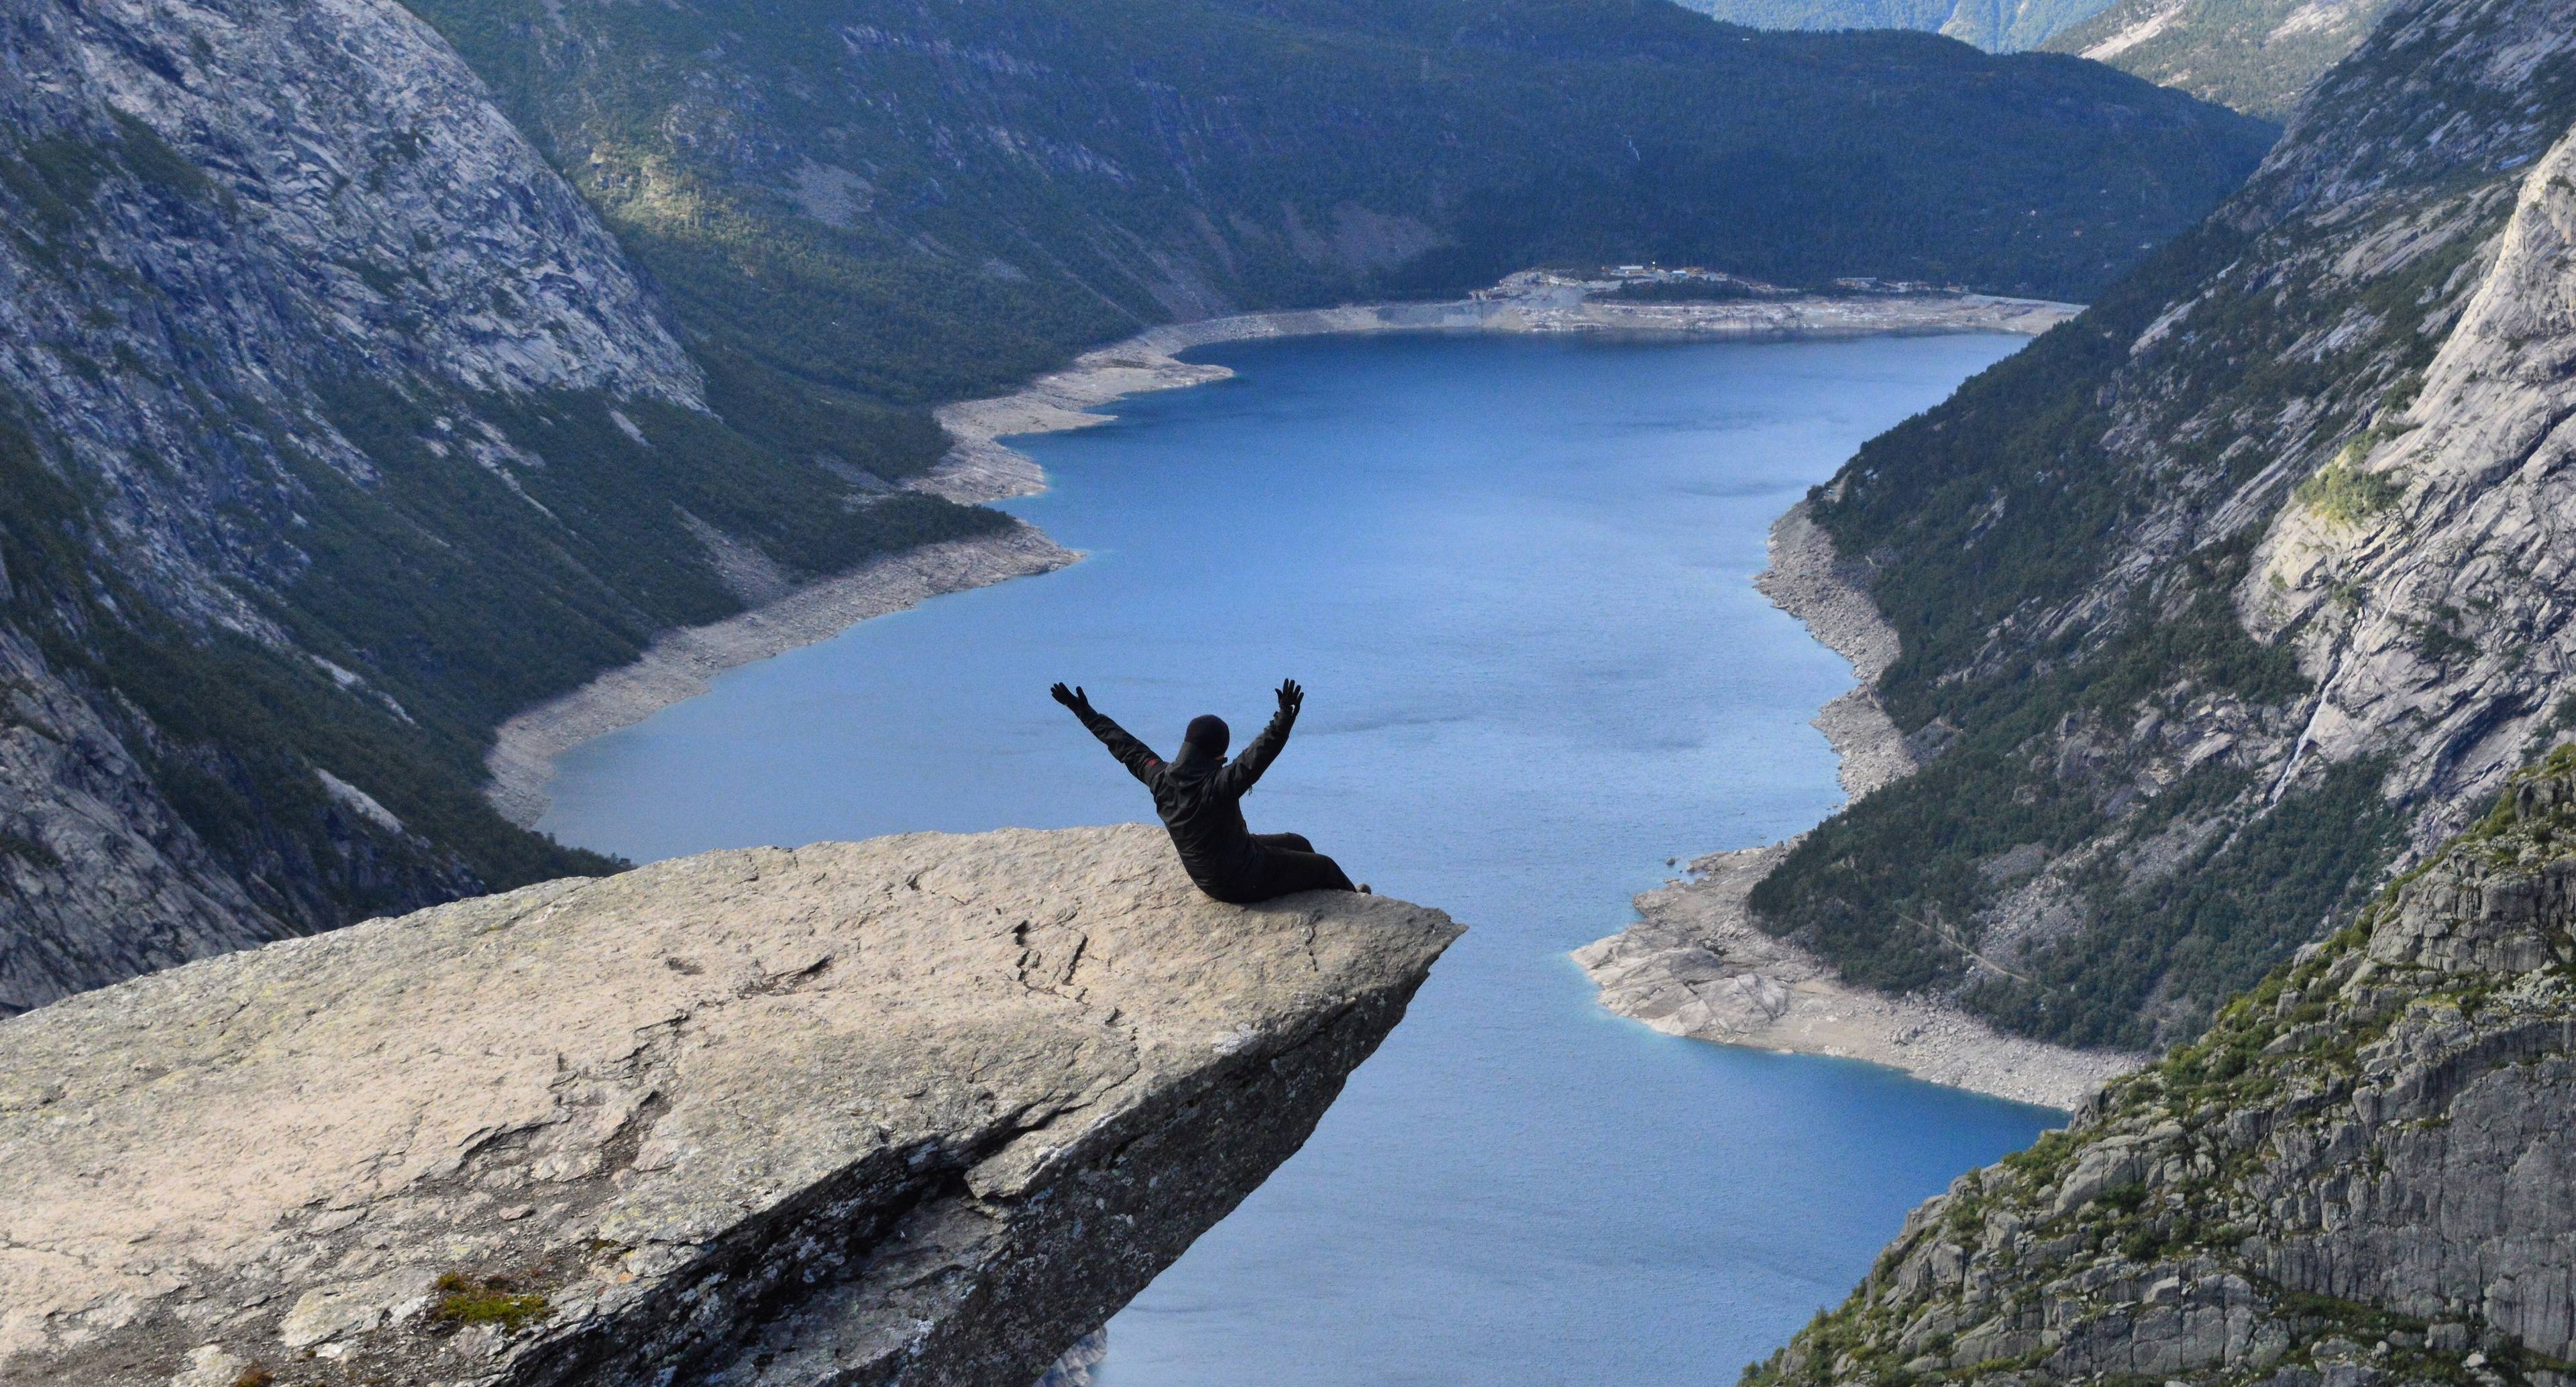 Head Over to Trolltunga for an Incredible Hike and Some Stunning Views From the Jutting Rock